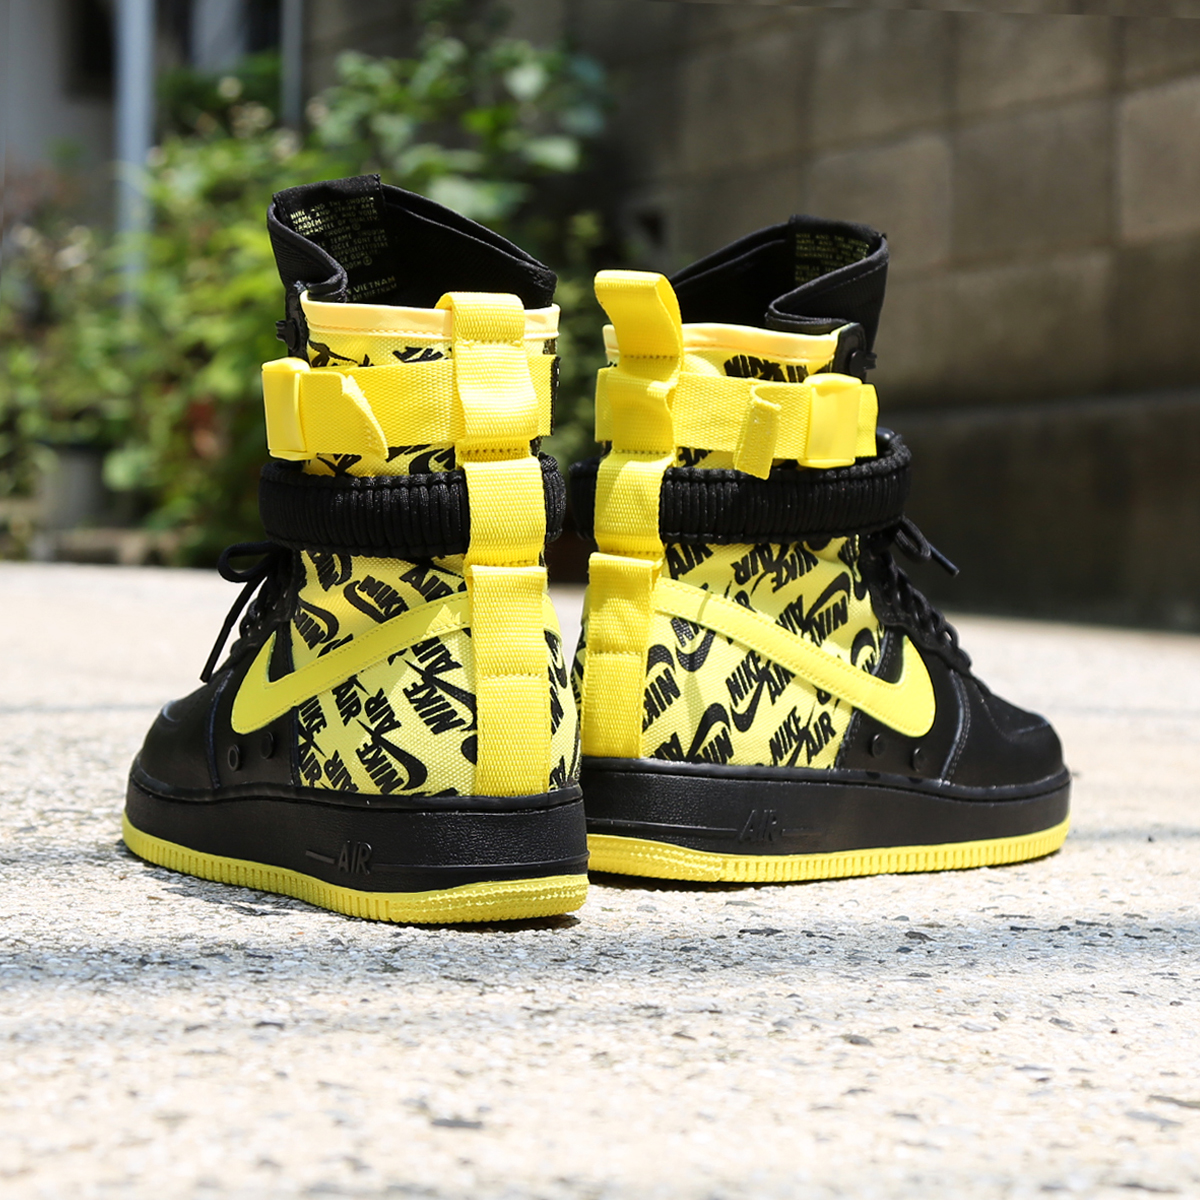 nike sf air force 1 high black and yellow